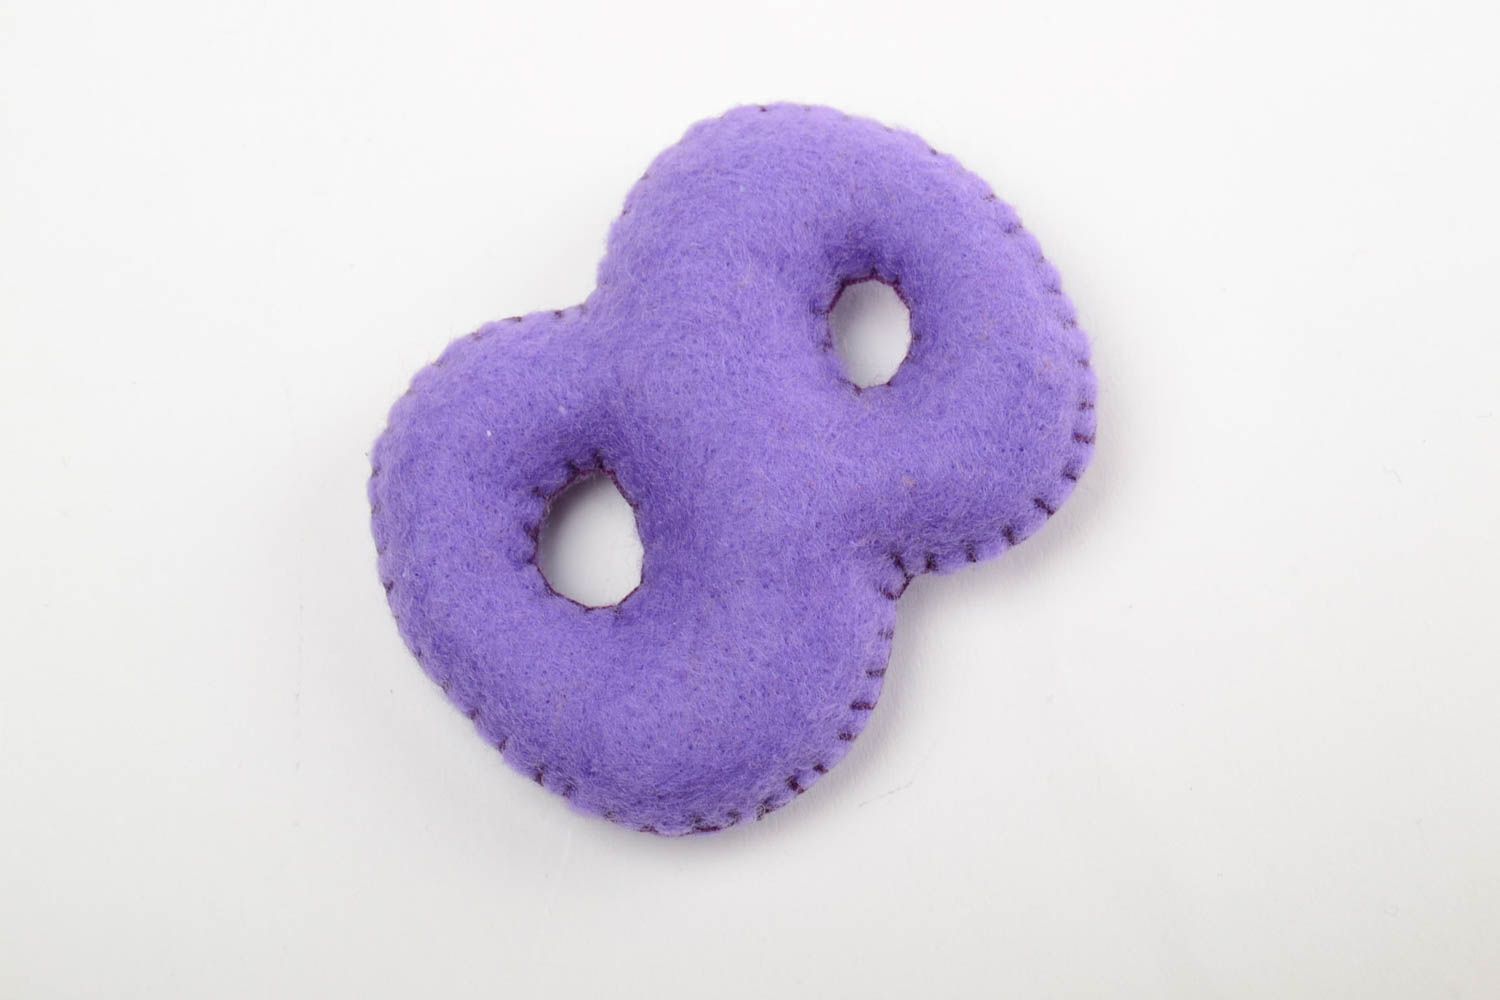 Handmade small violet felt educational soft toy number 8 for count studying photo 2